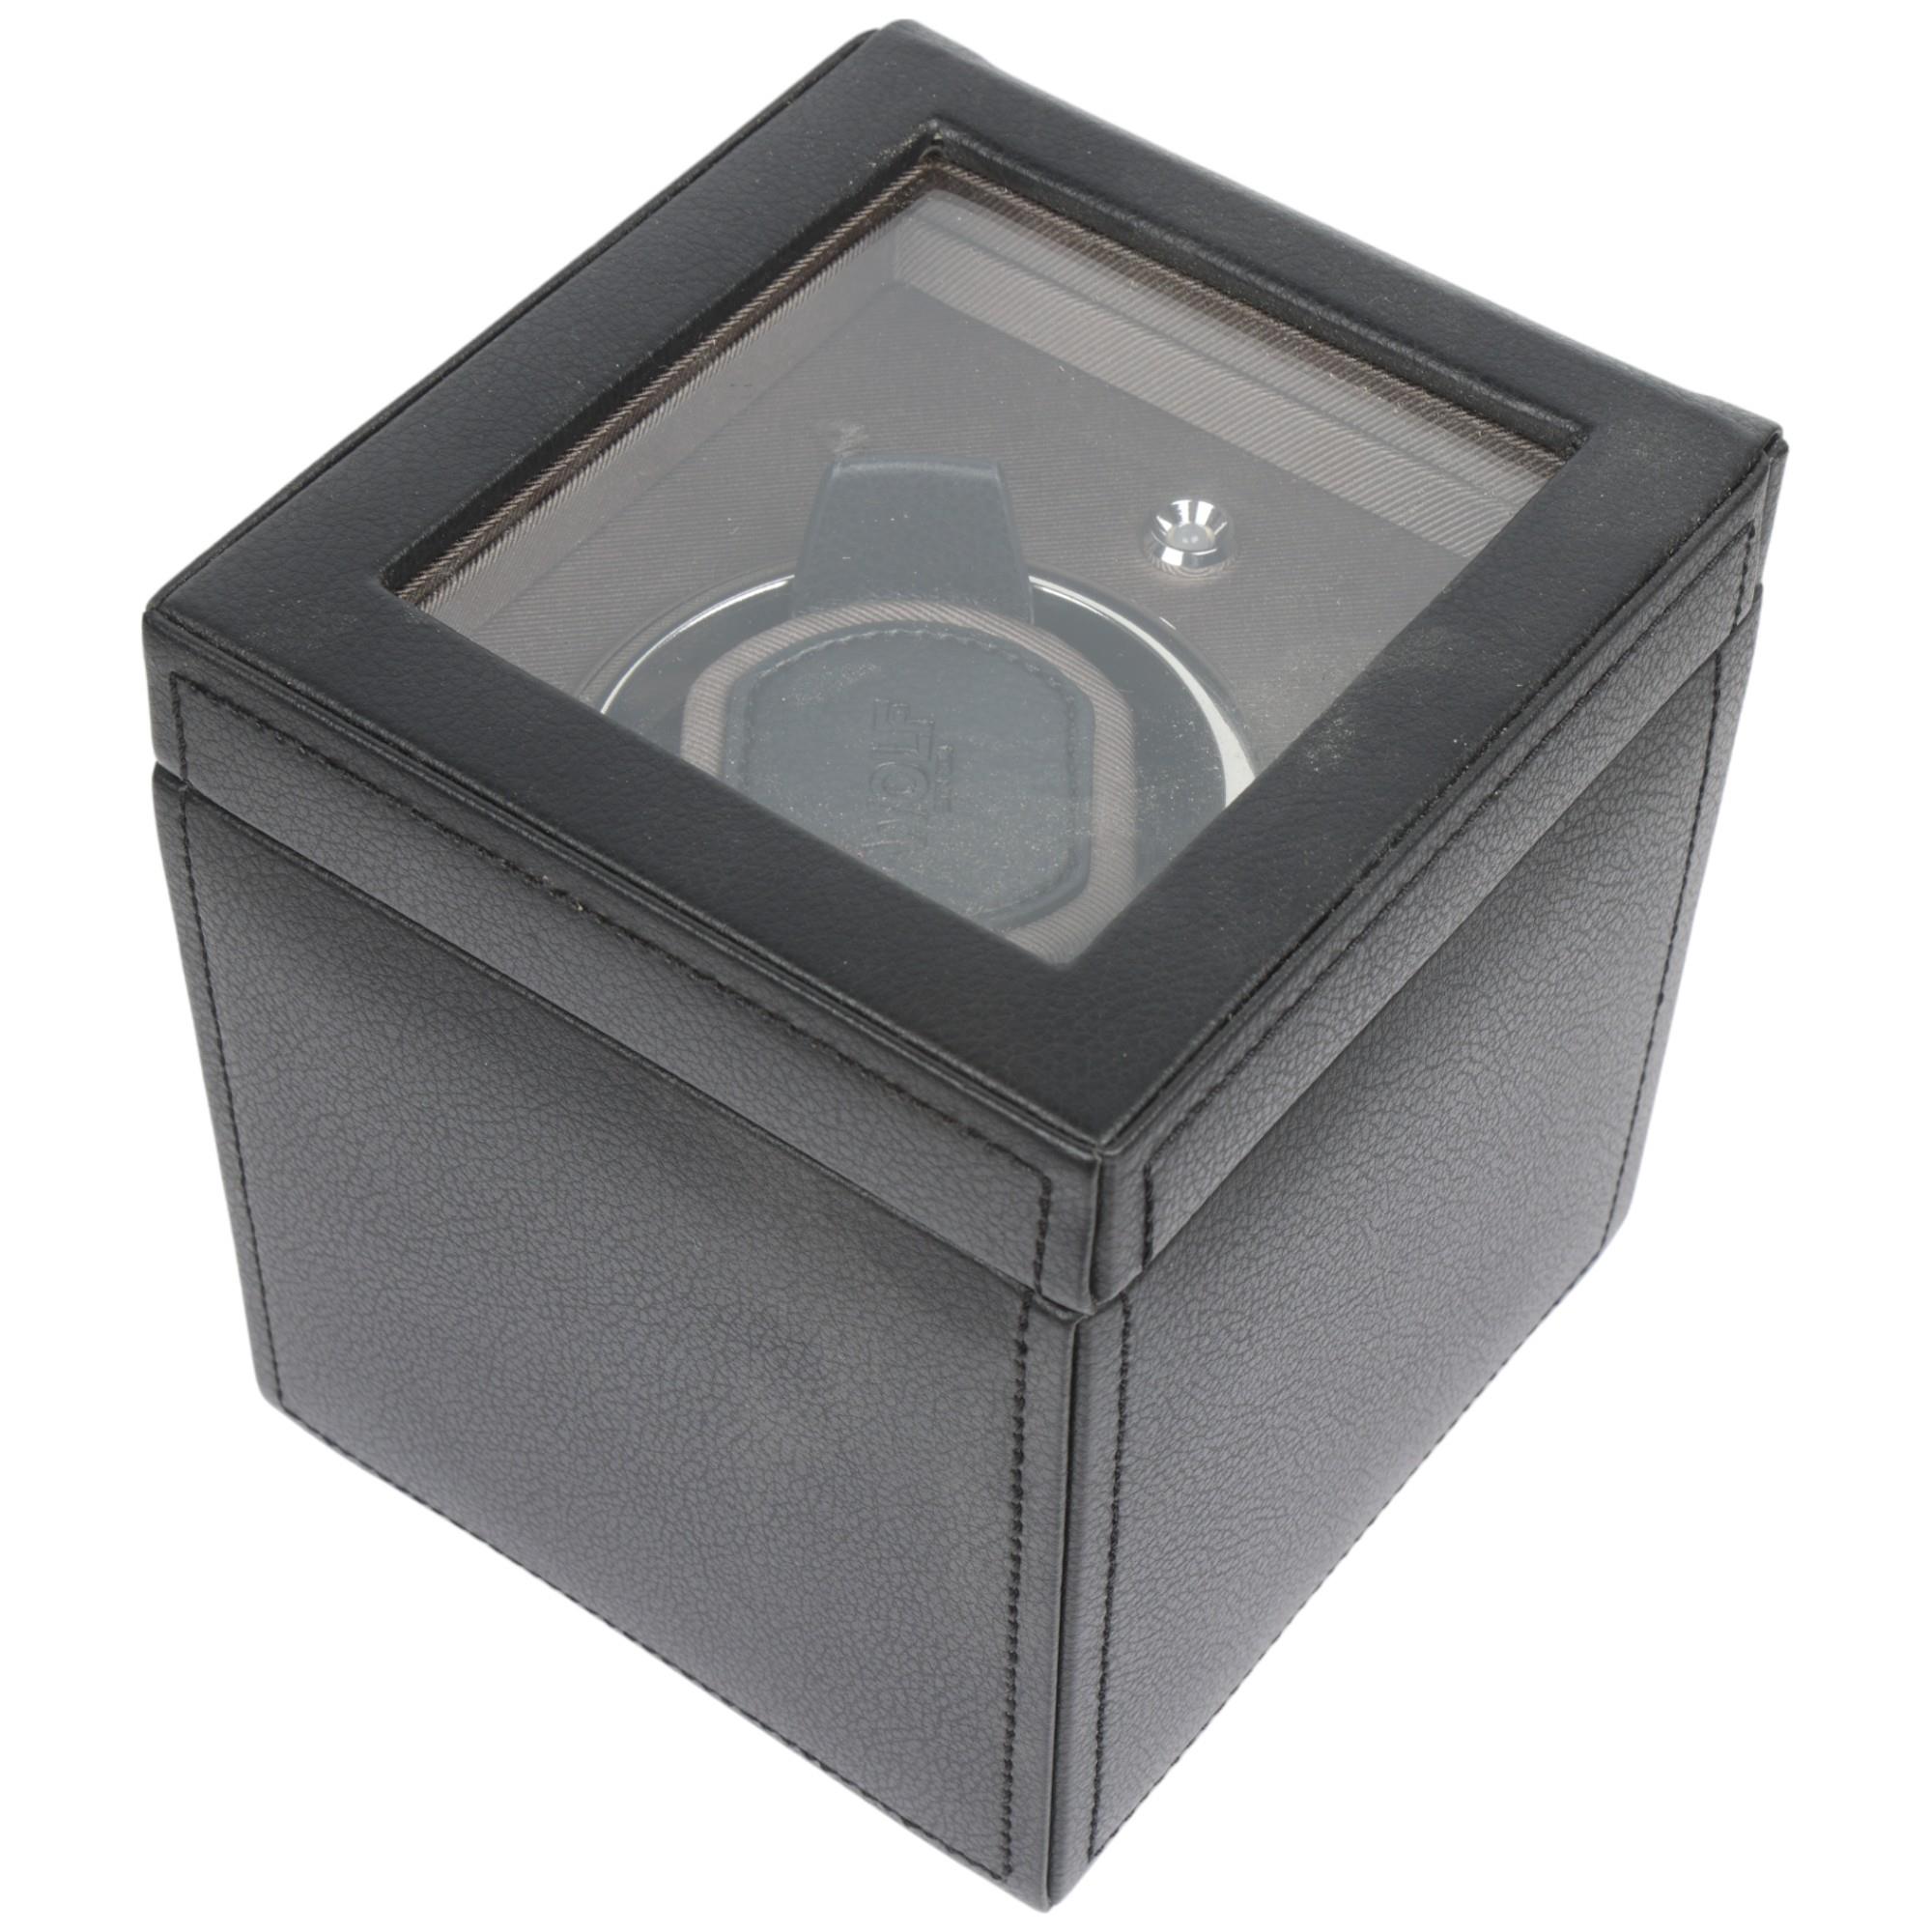 WOLF - a near new Cub Module 1.8 single watch winder, boxed with accessories and power lead (RRP £